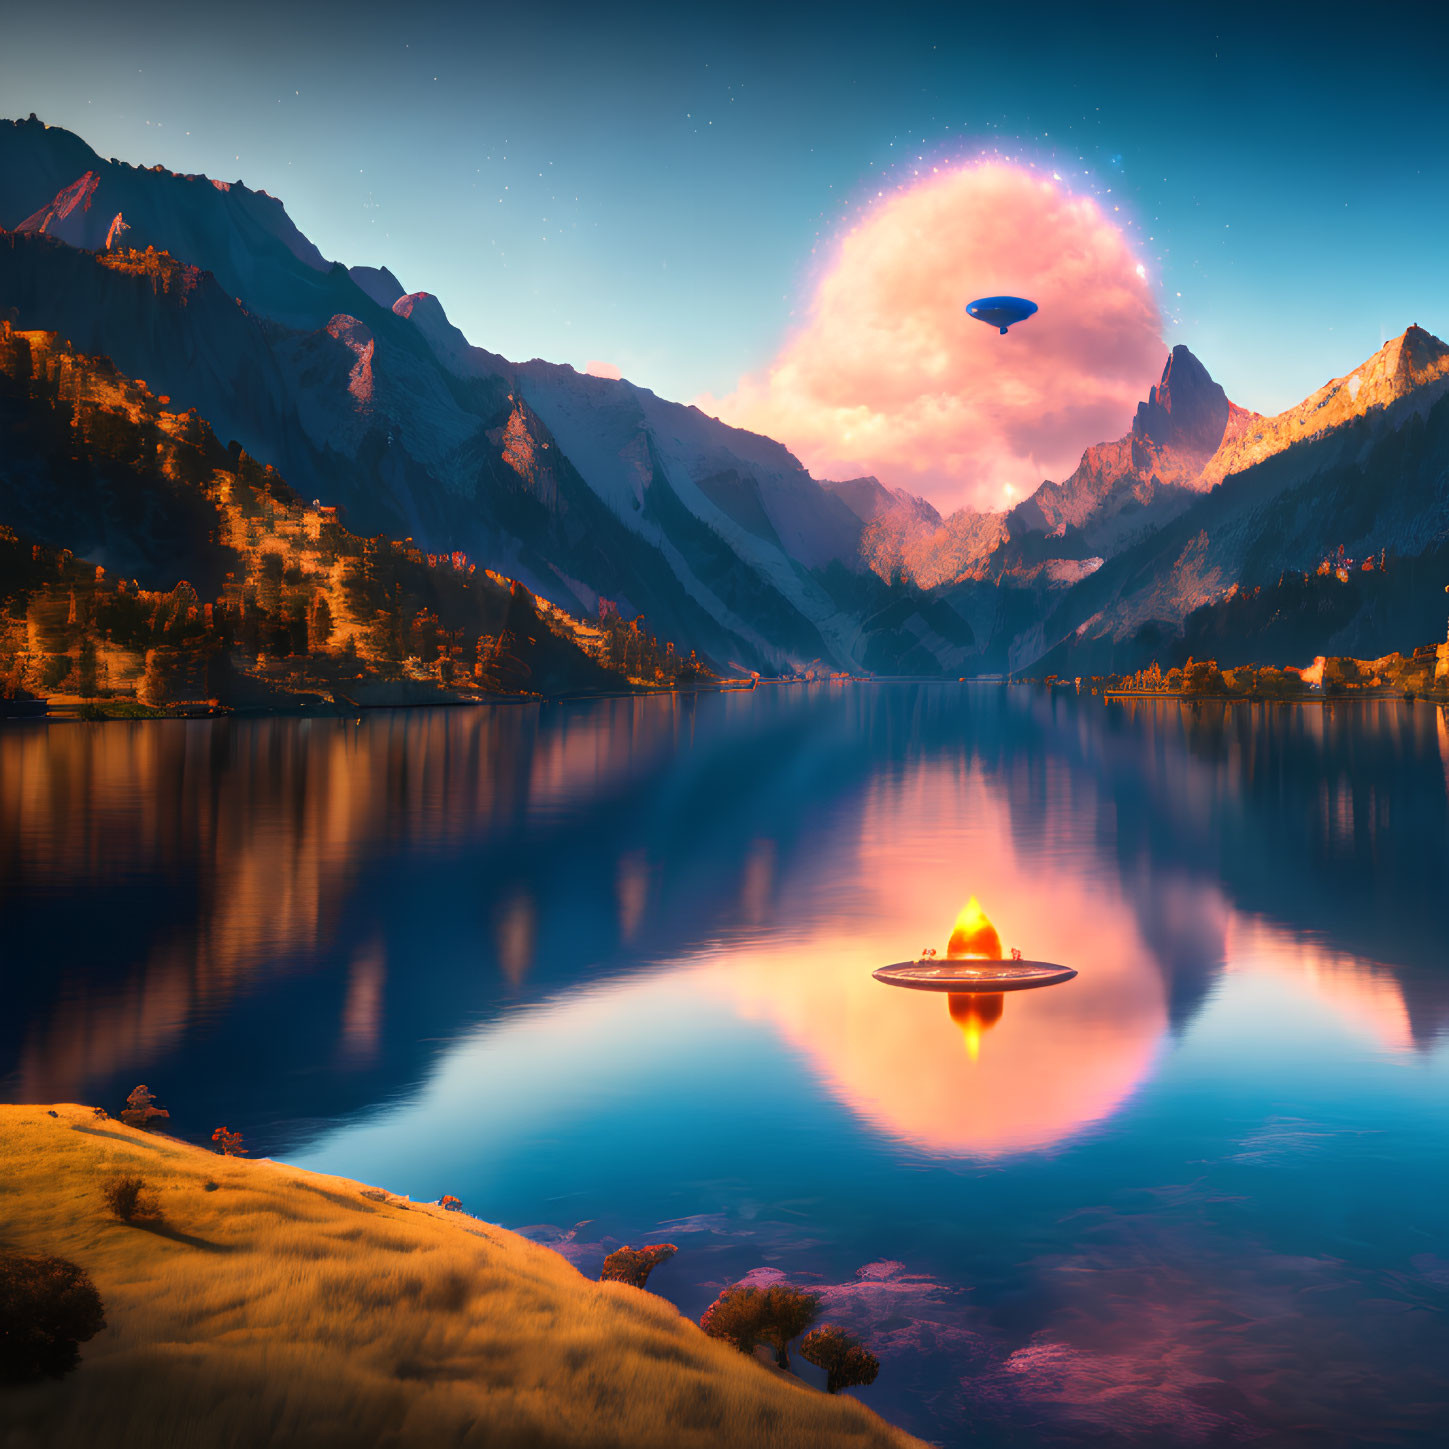 Mountain lake at dusk with futuristic UFOs and glowing portal